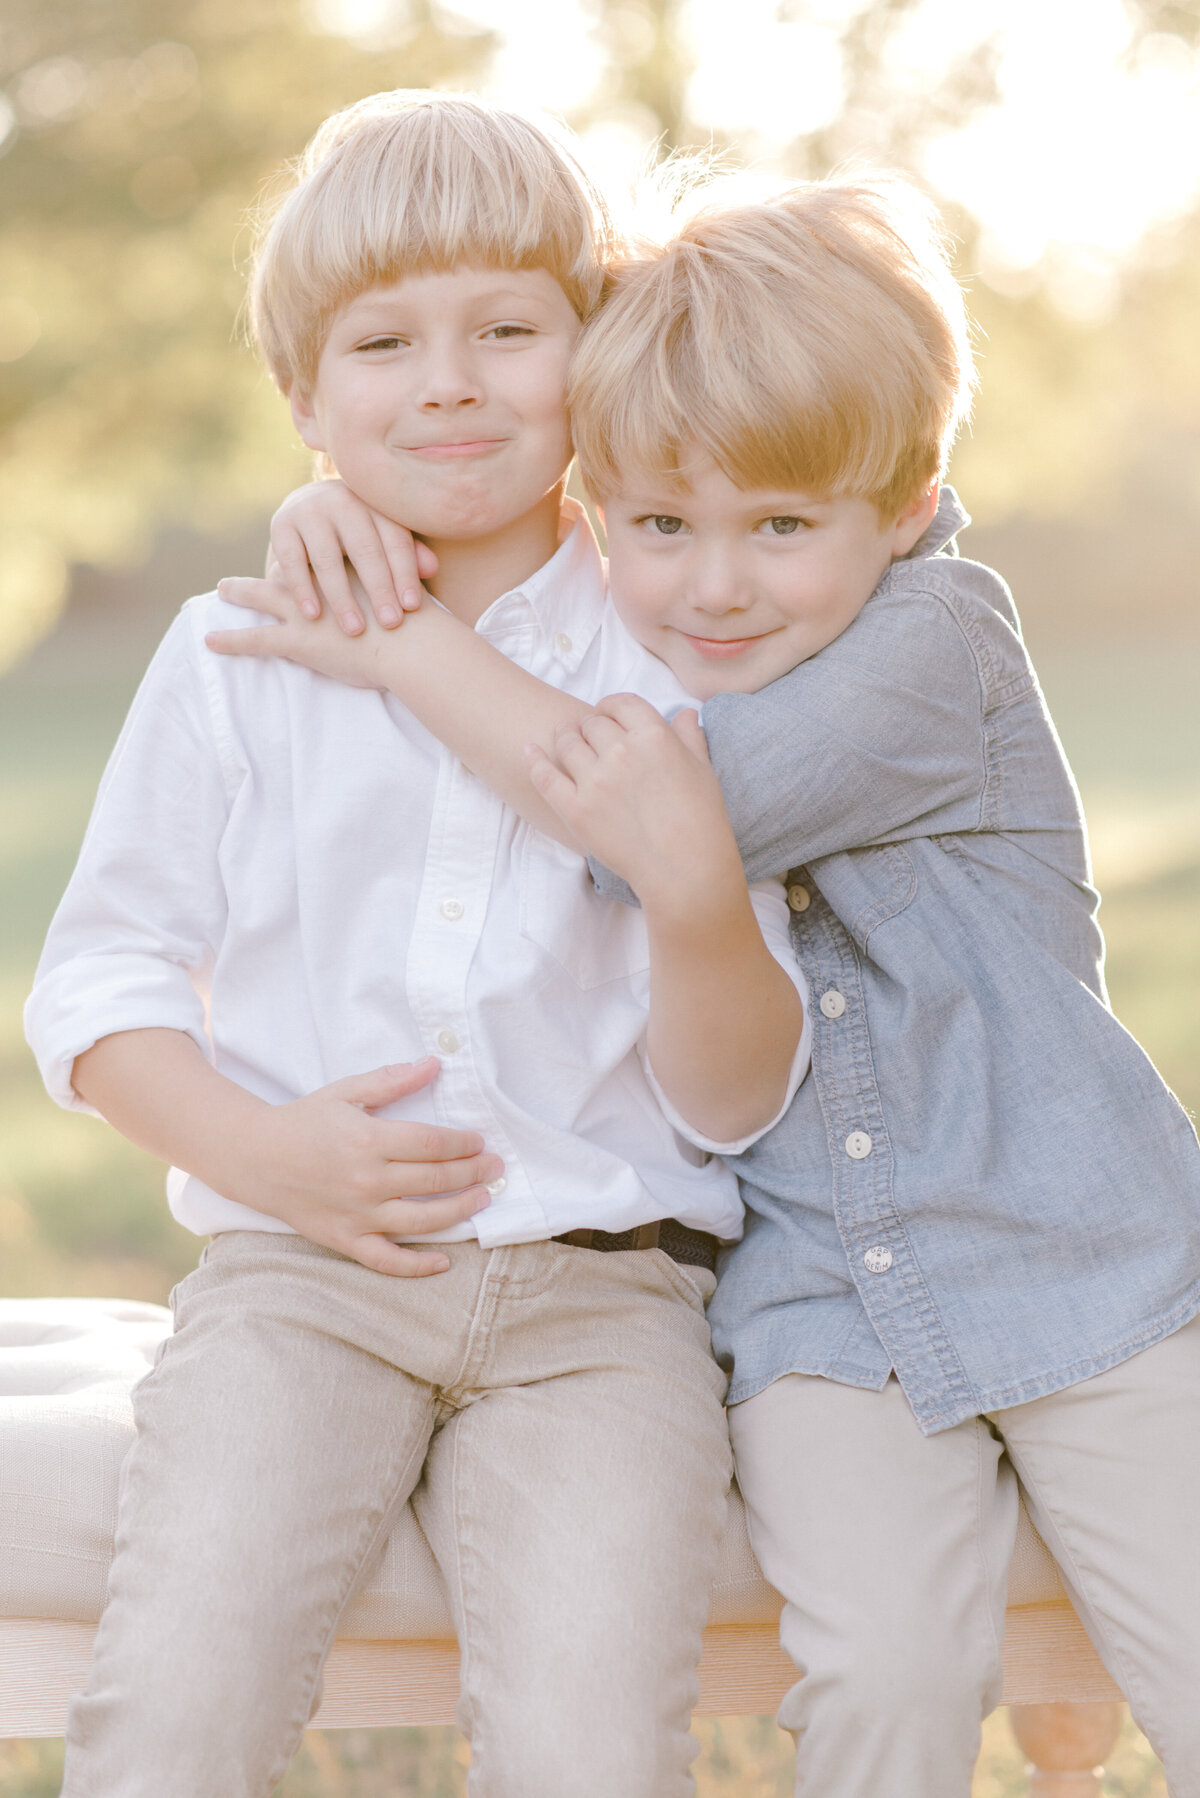 Two young brothers hugging each other and smiling at the camera with the Texas sun setting behind them